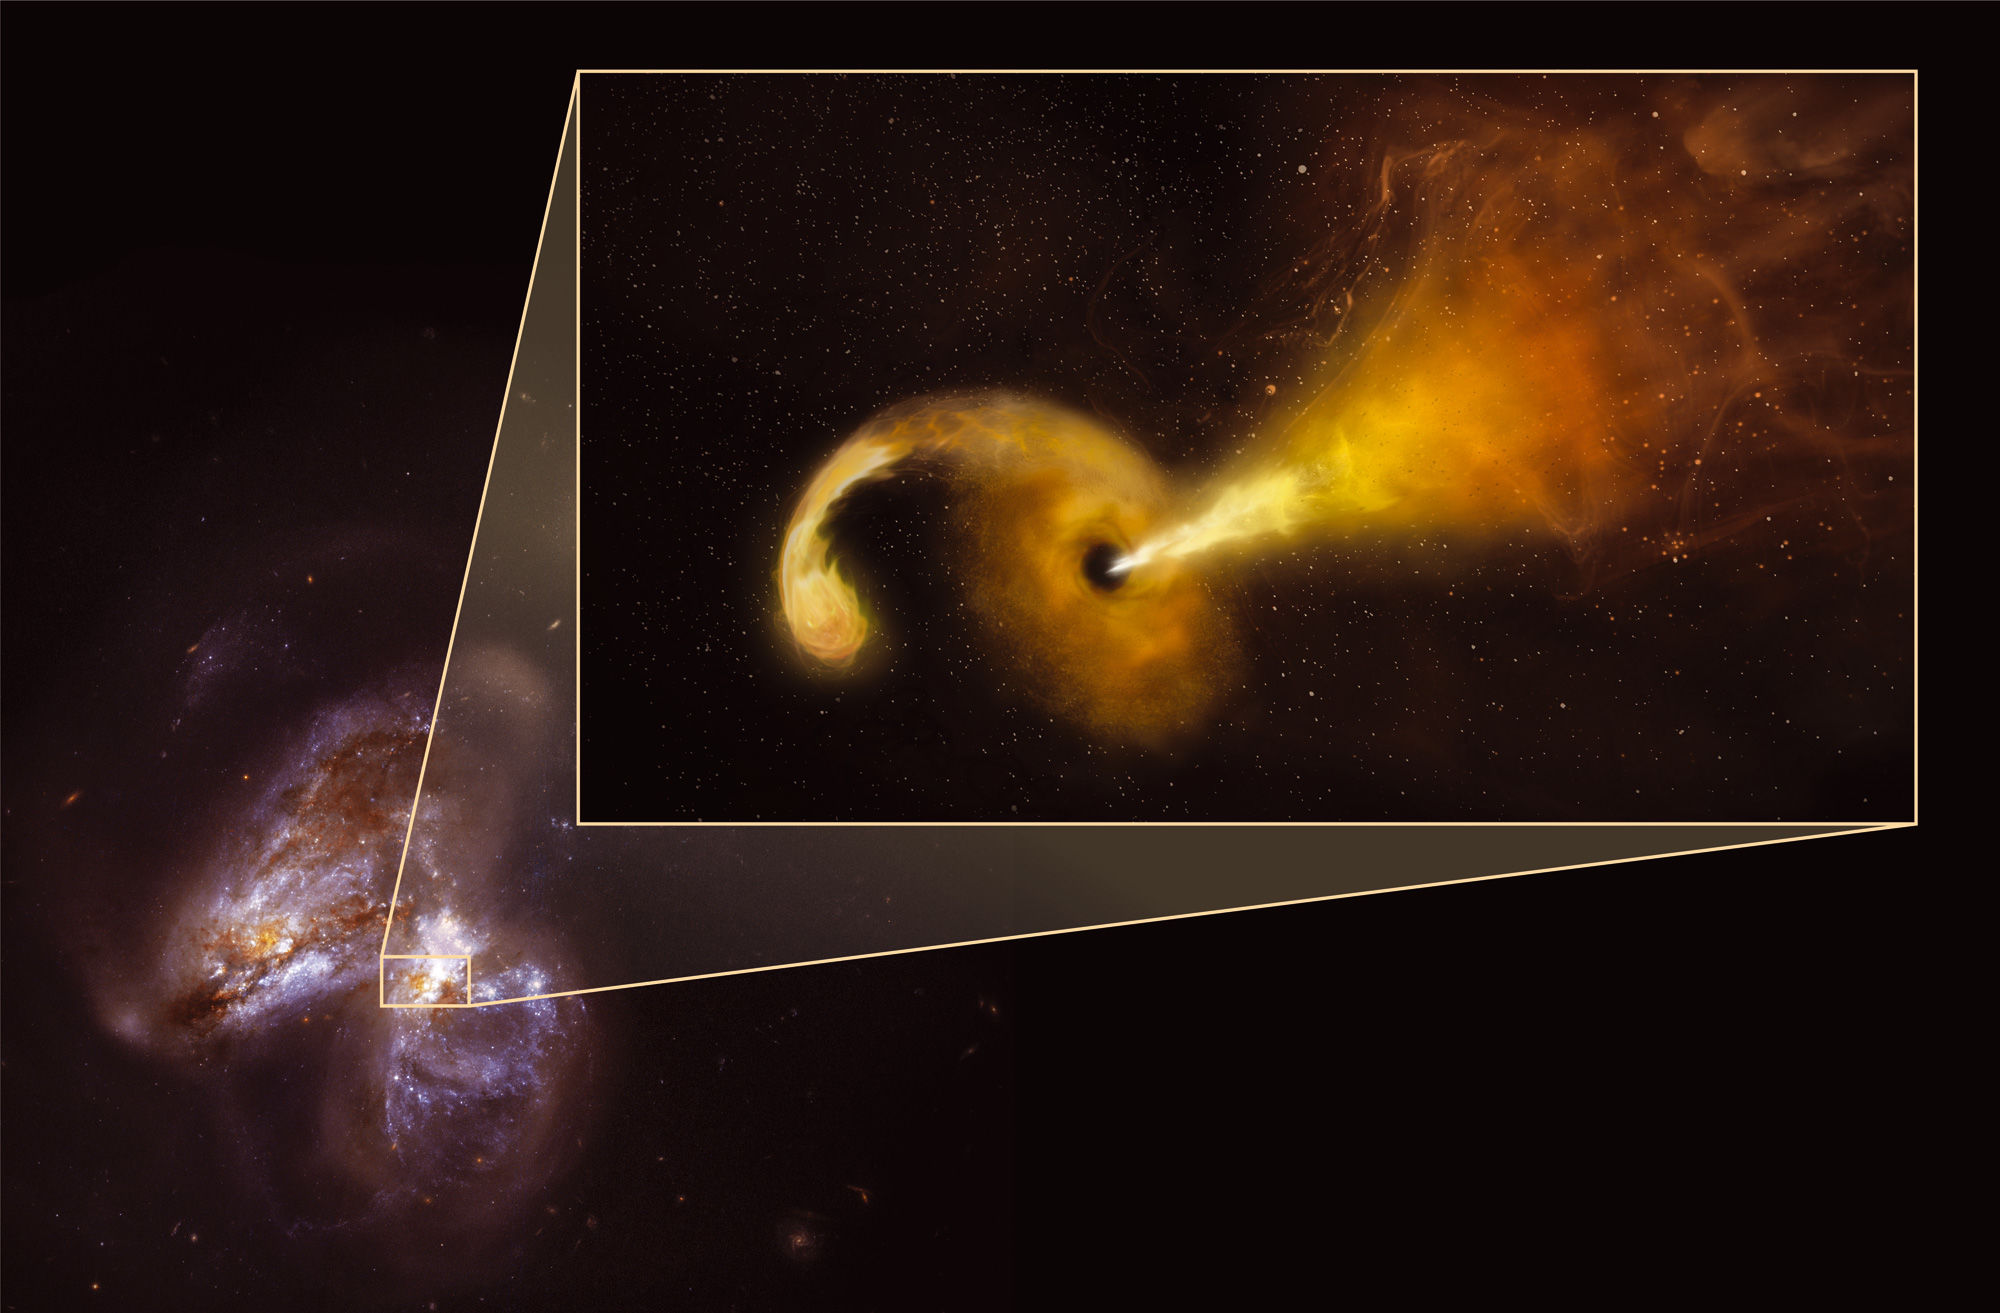 Artwork depicting a star torn apart by a black hole in Arp 299, with a beam of material blasting away. Credit: Sophia Dagnello, NRAO/AUI/NSF; NASA, STScI